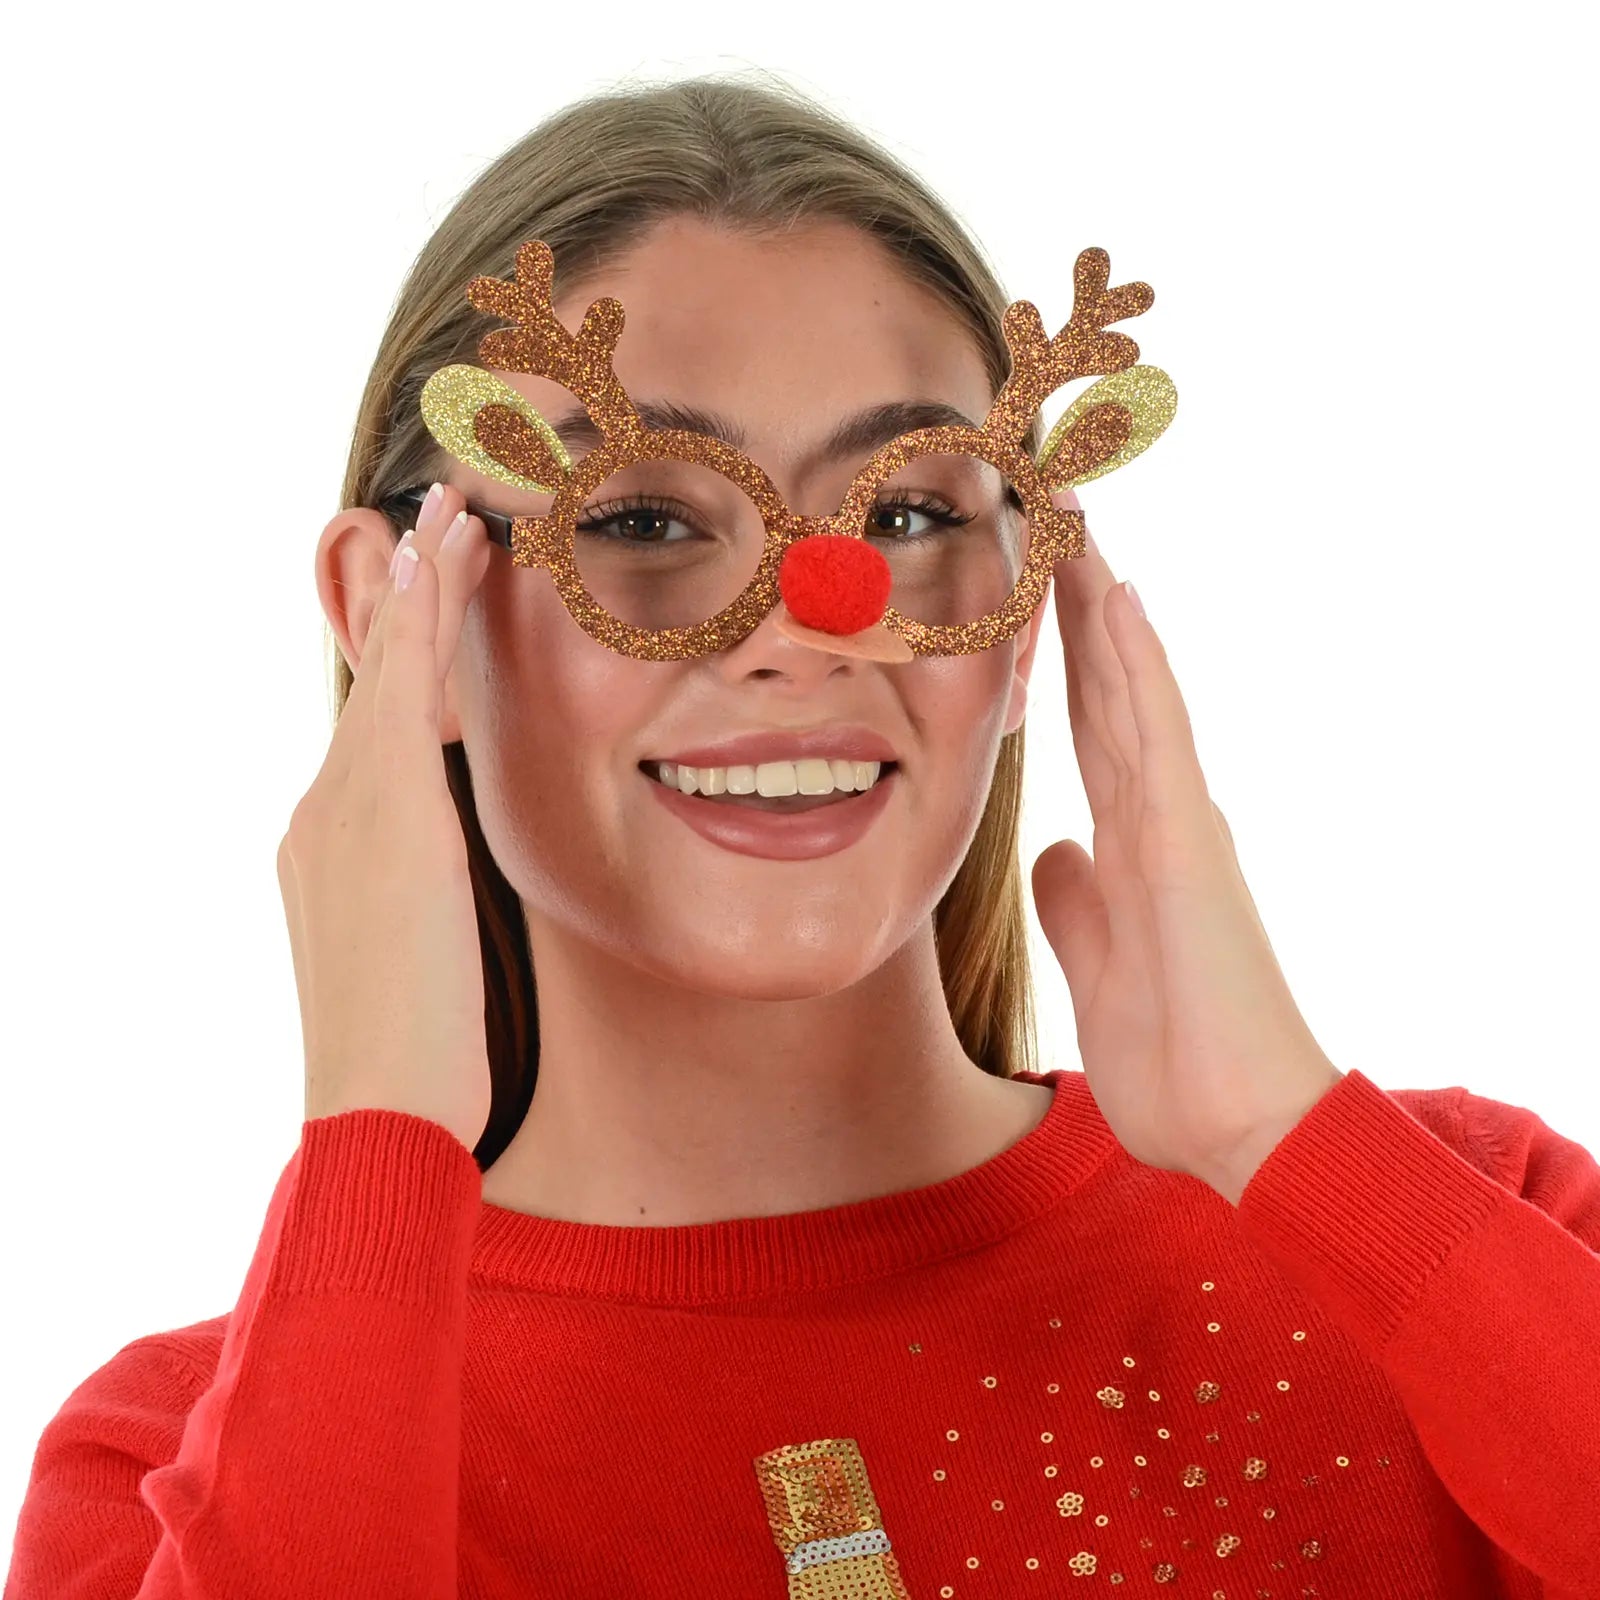 model wears brown glasses shaped like reindeer antlers featuring glitter finish and red pom pom nose